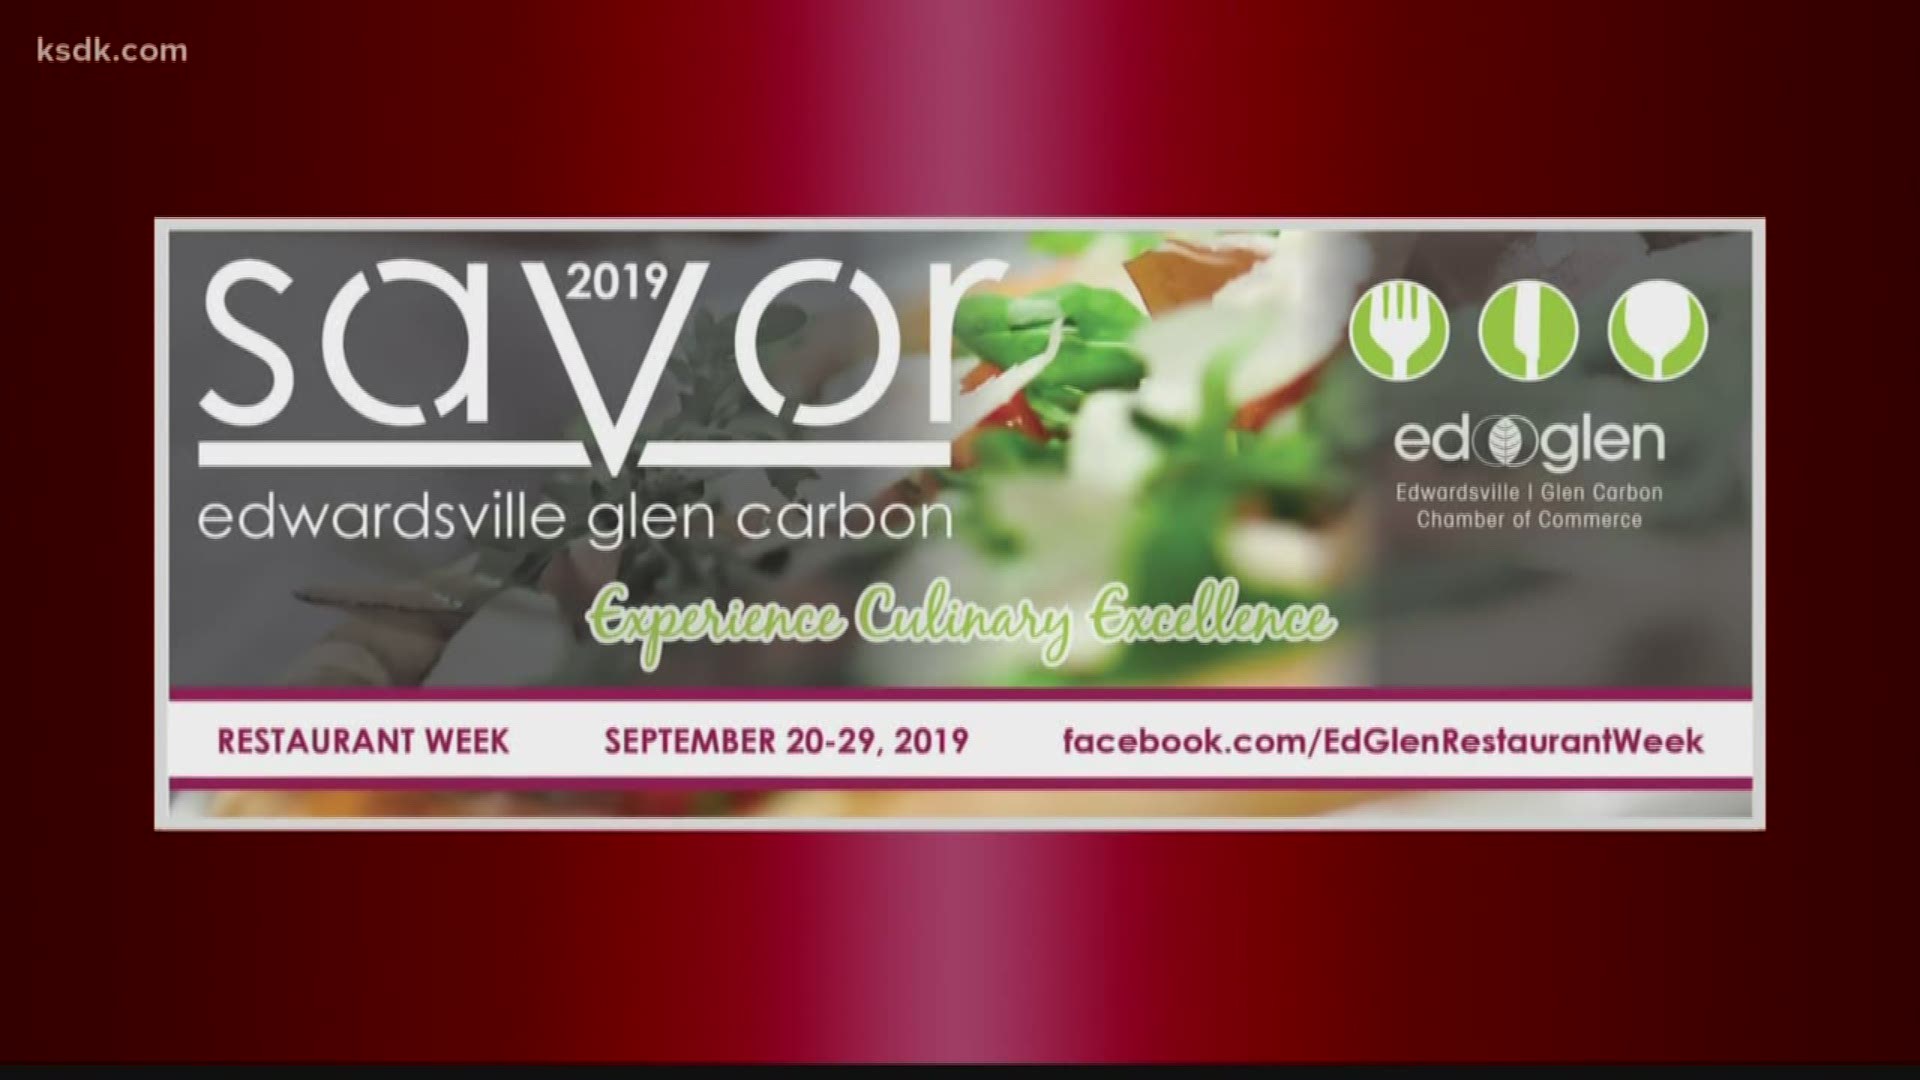 Edwardsville has an incredible food scene, and you can get a great deal now, through Sunday thanks to Savor Restaurant Week.